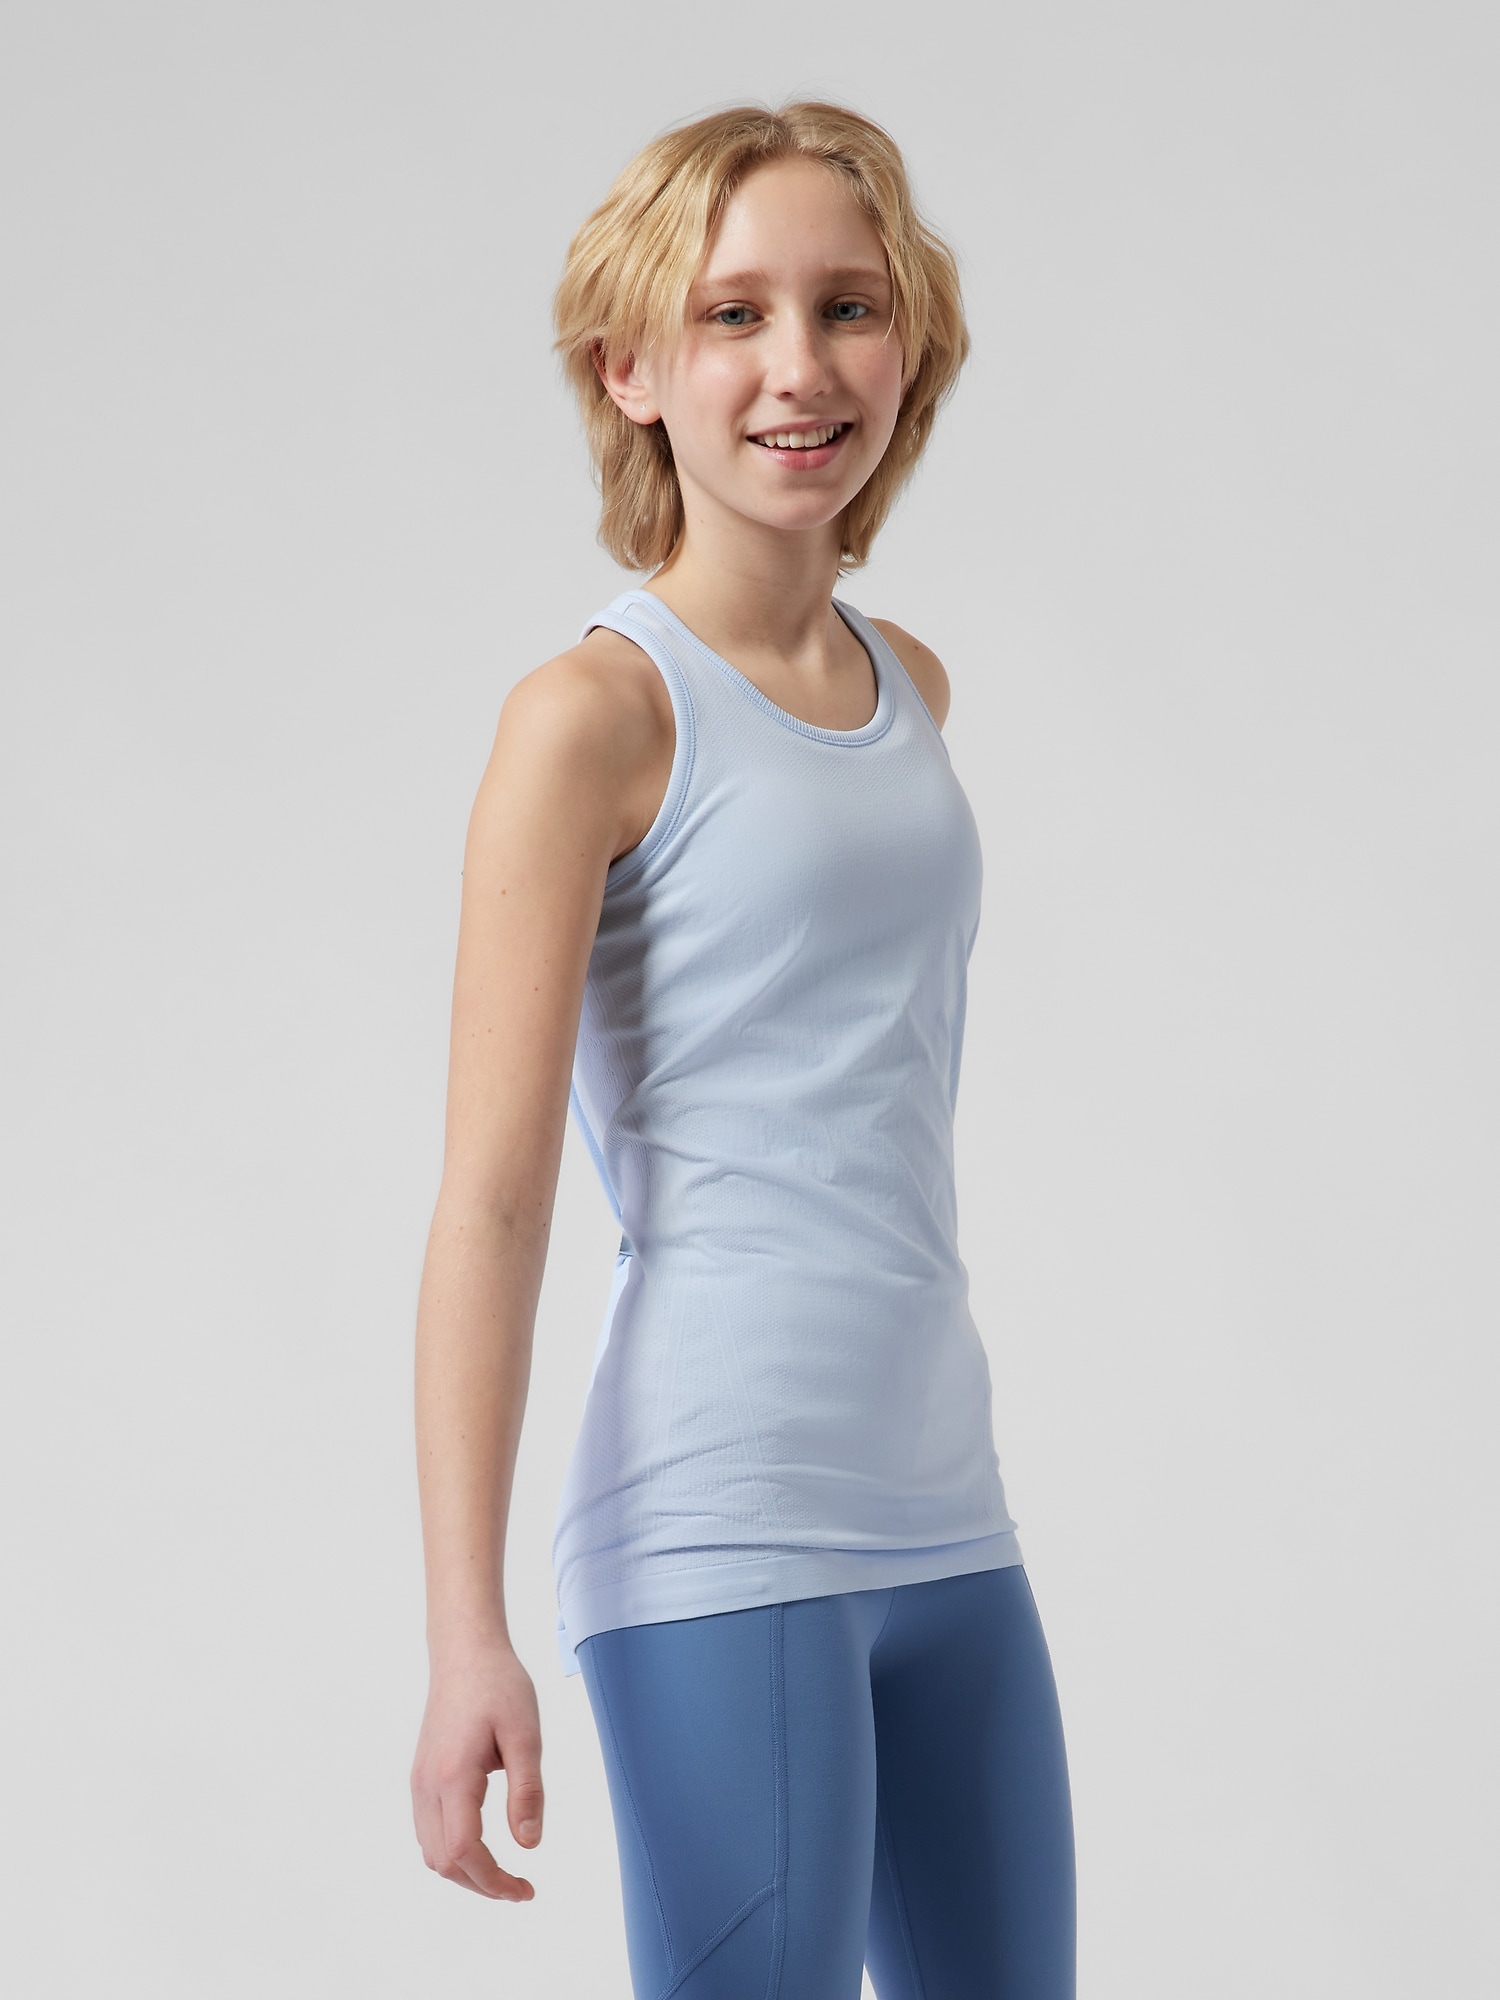 Athleta Girl Stand Out Support Tank